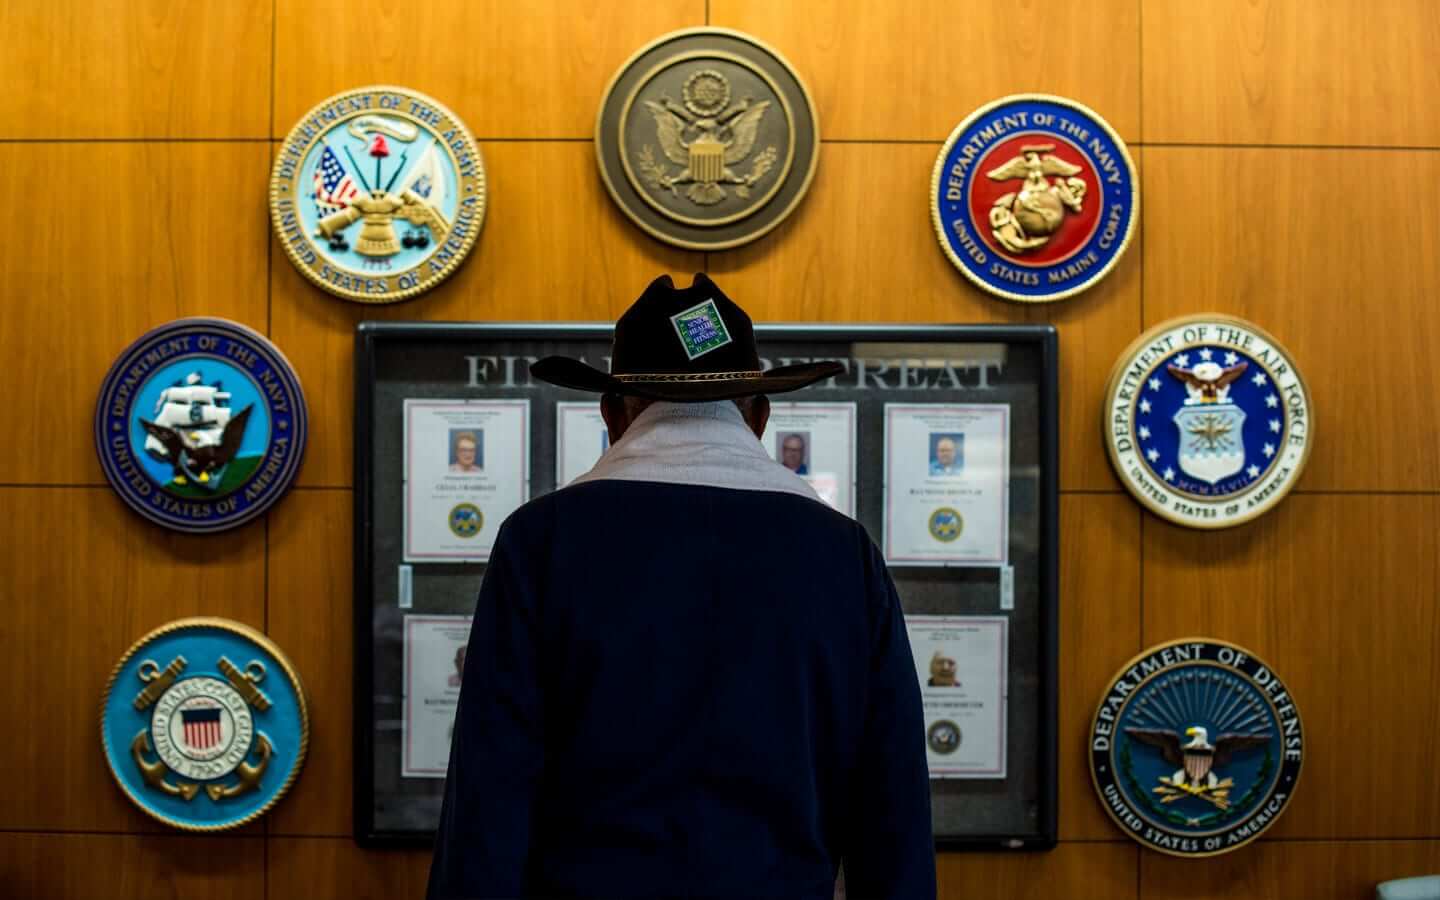 An old male Veteran is facing a wall with symbols/icons of military branches.